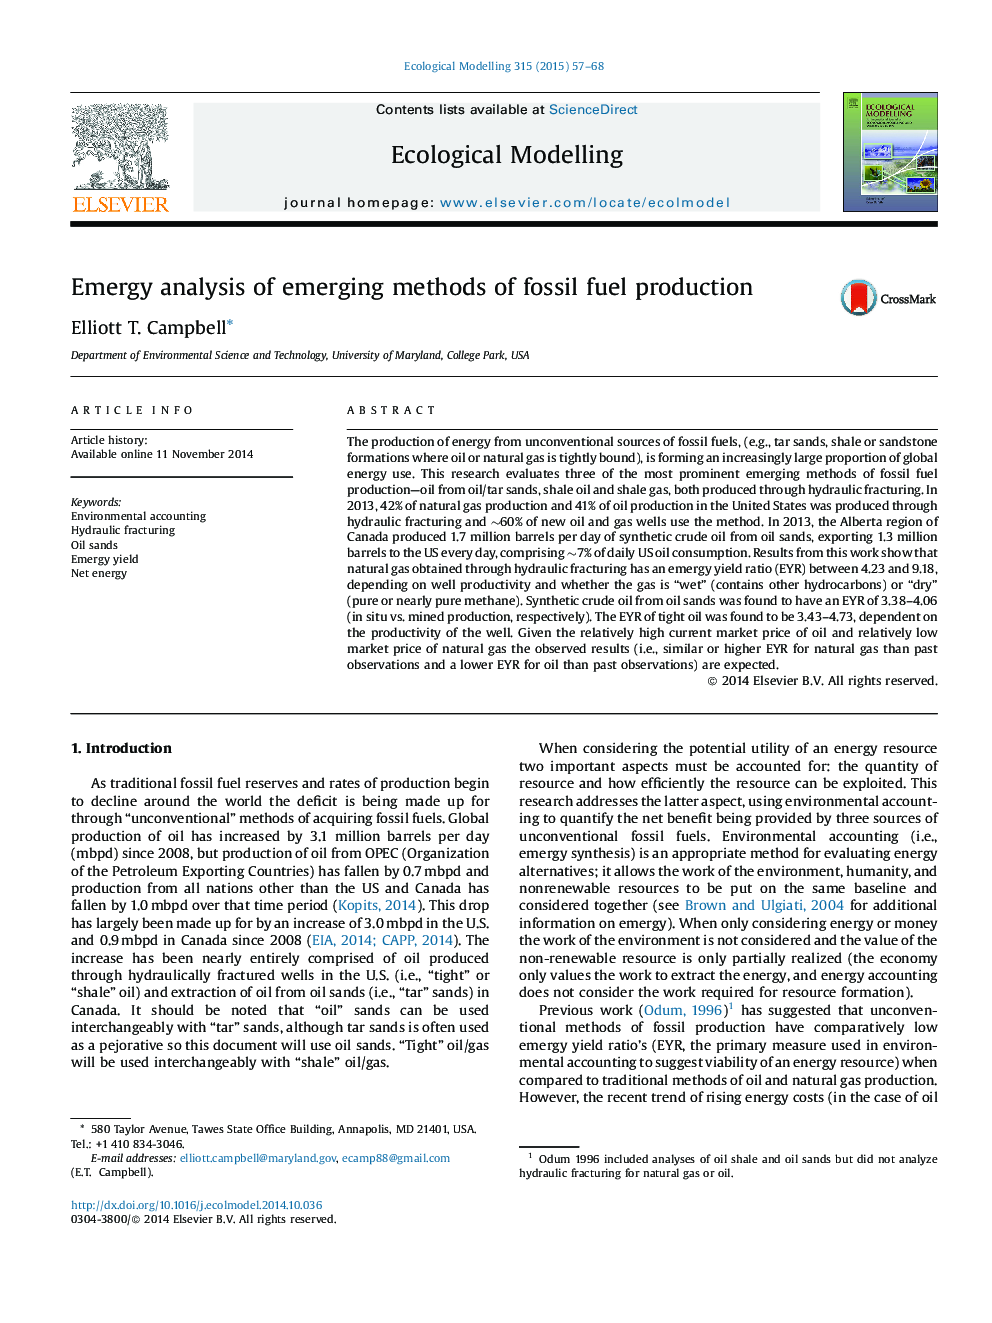 Emergy analysis of emerging methods of fossil fuel production